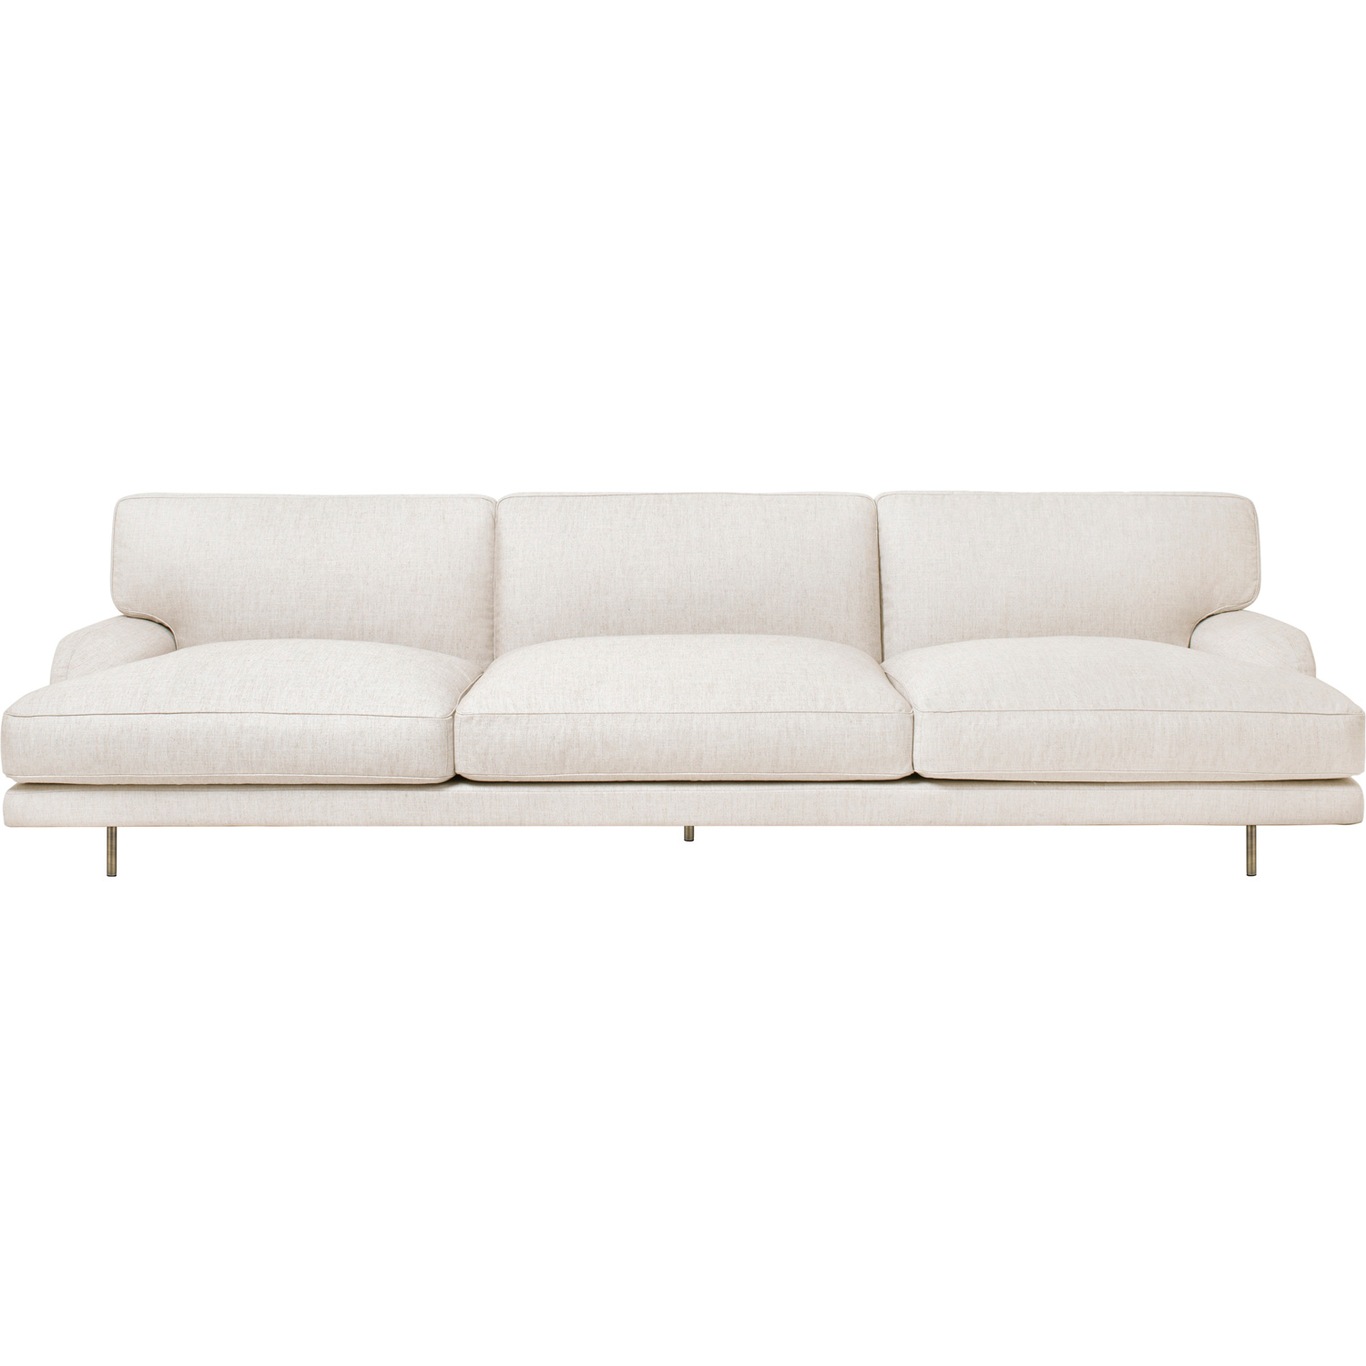 Flaneur Sofa LC 3-Seater, Legs Brass / Hot Madison 419 Off White